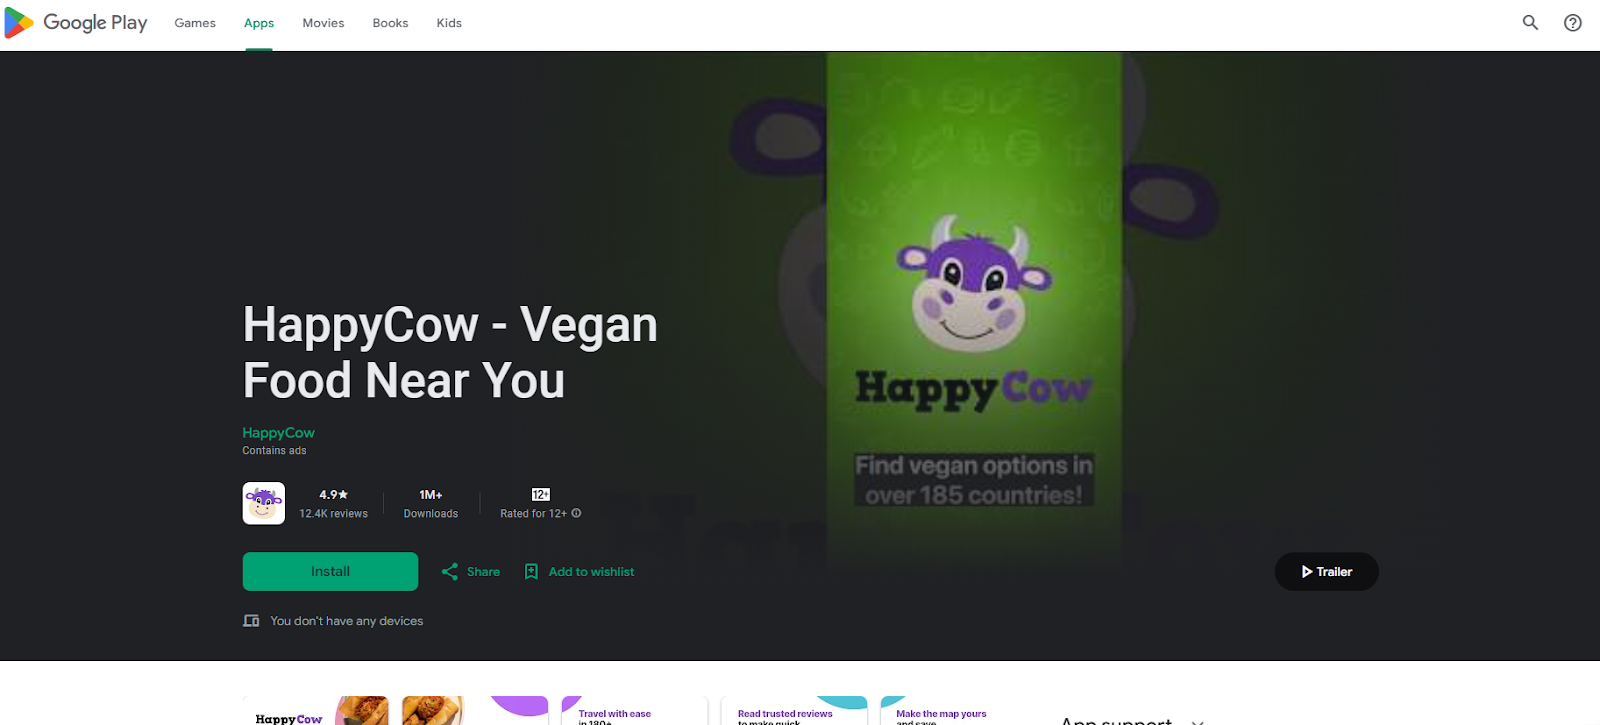 How to Use and Download HappyCow